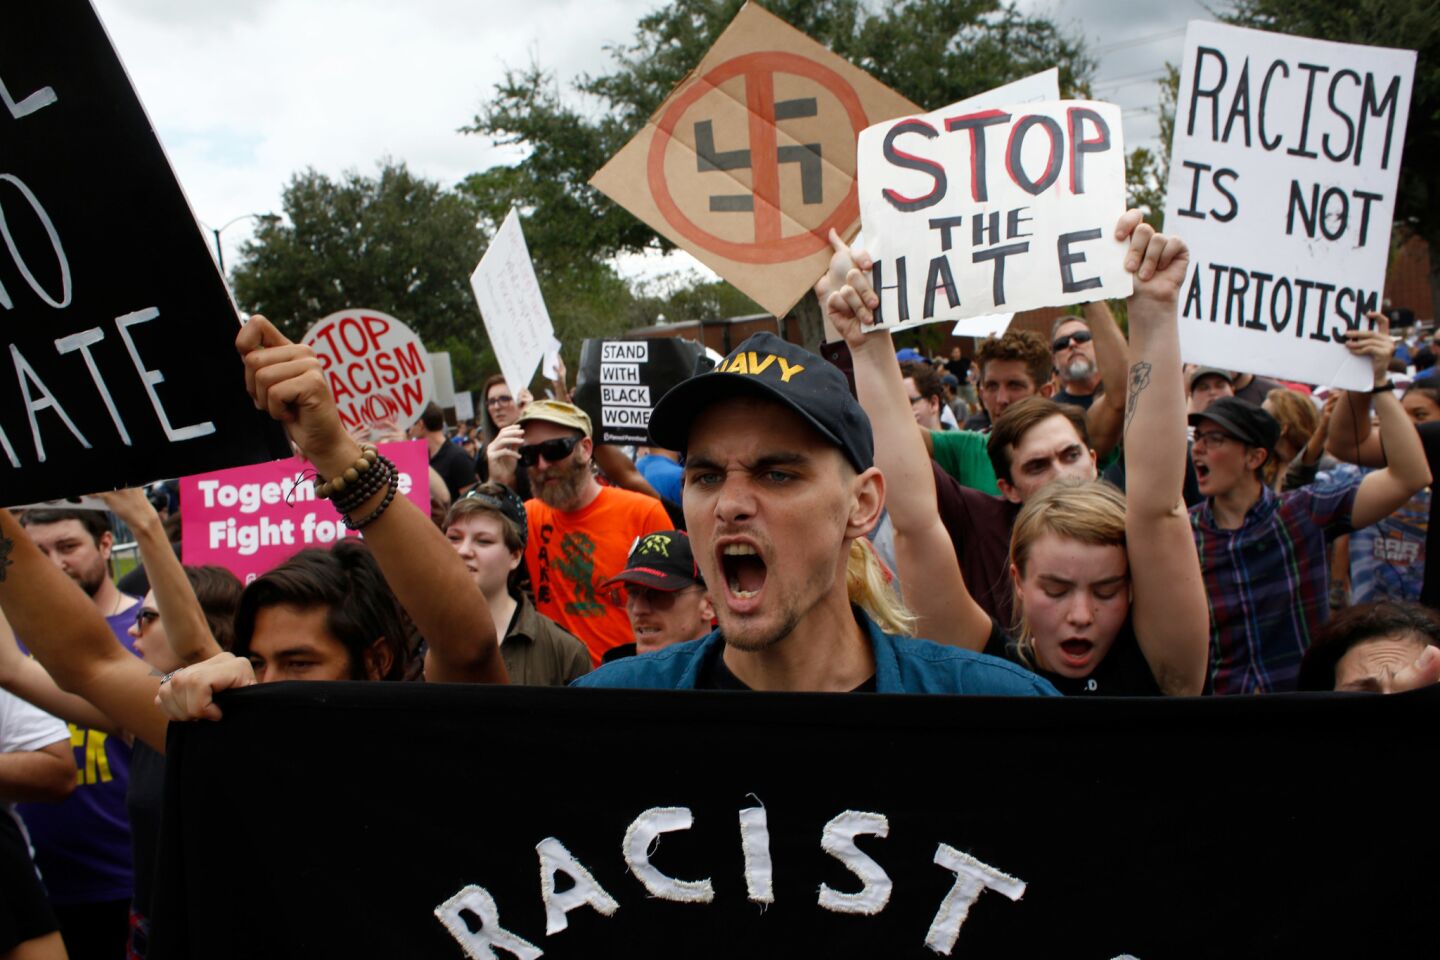 Protesters chant and hold signs at the site of a planned speech by white nationalist Richard Spencer on the University of Florida campus on Thursday.